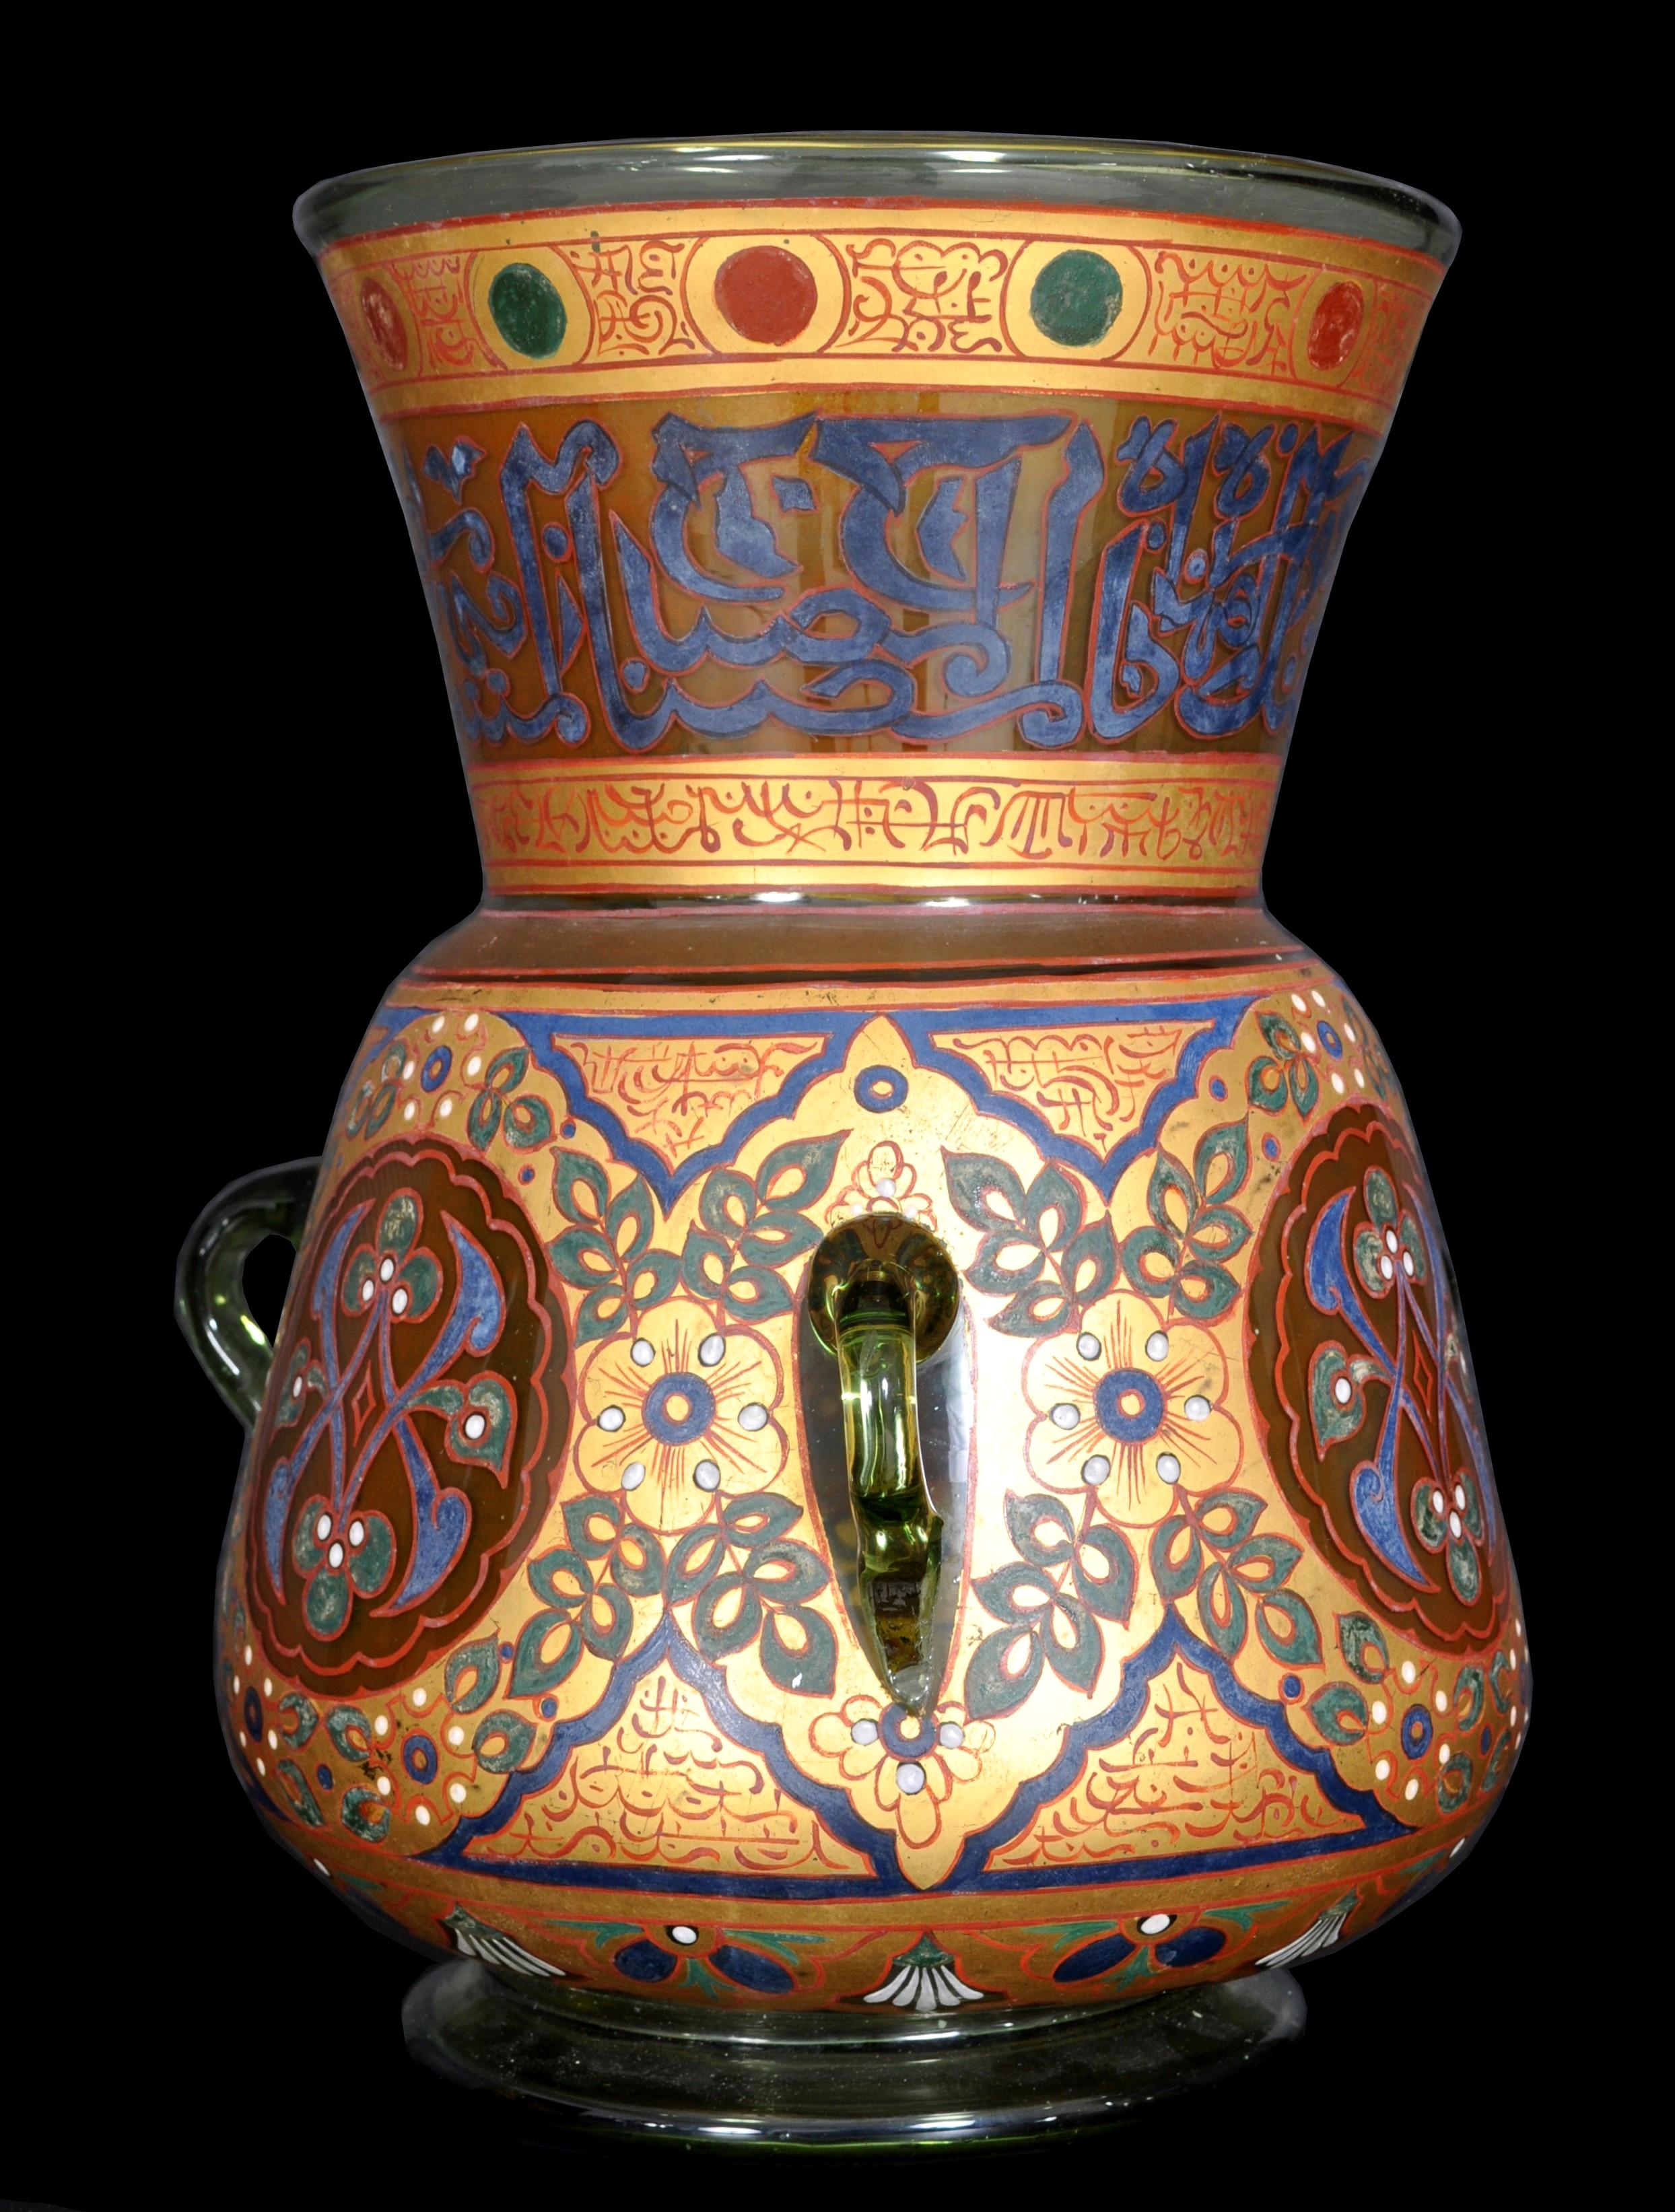 Hand-Painted Antique French Islamic Glass Enamel Gilt Mamluk Revival Mosque Lamp Brocard 1880